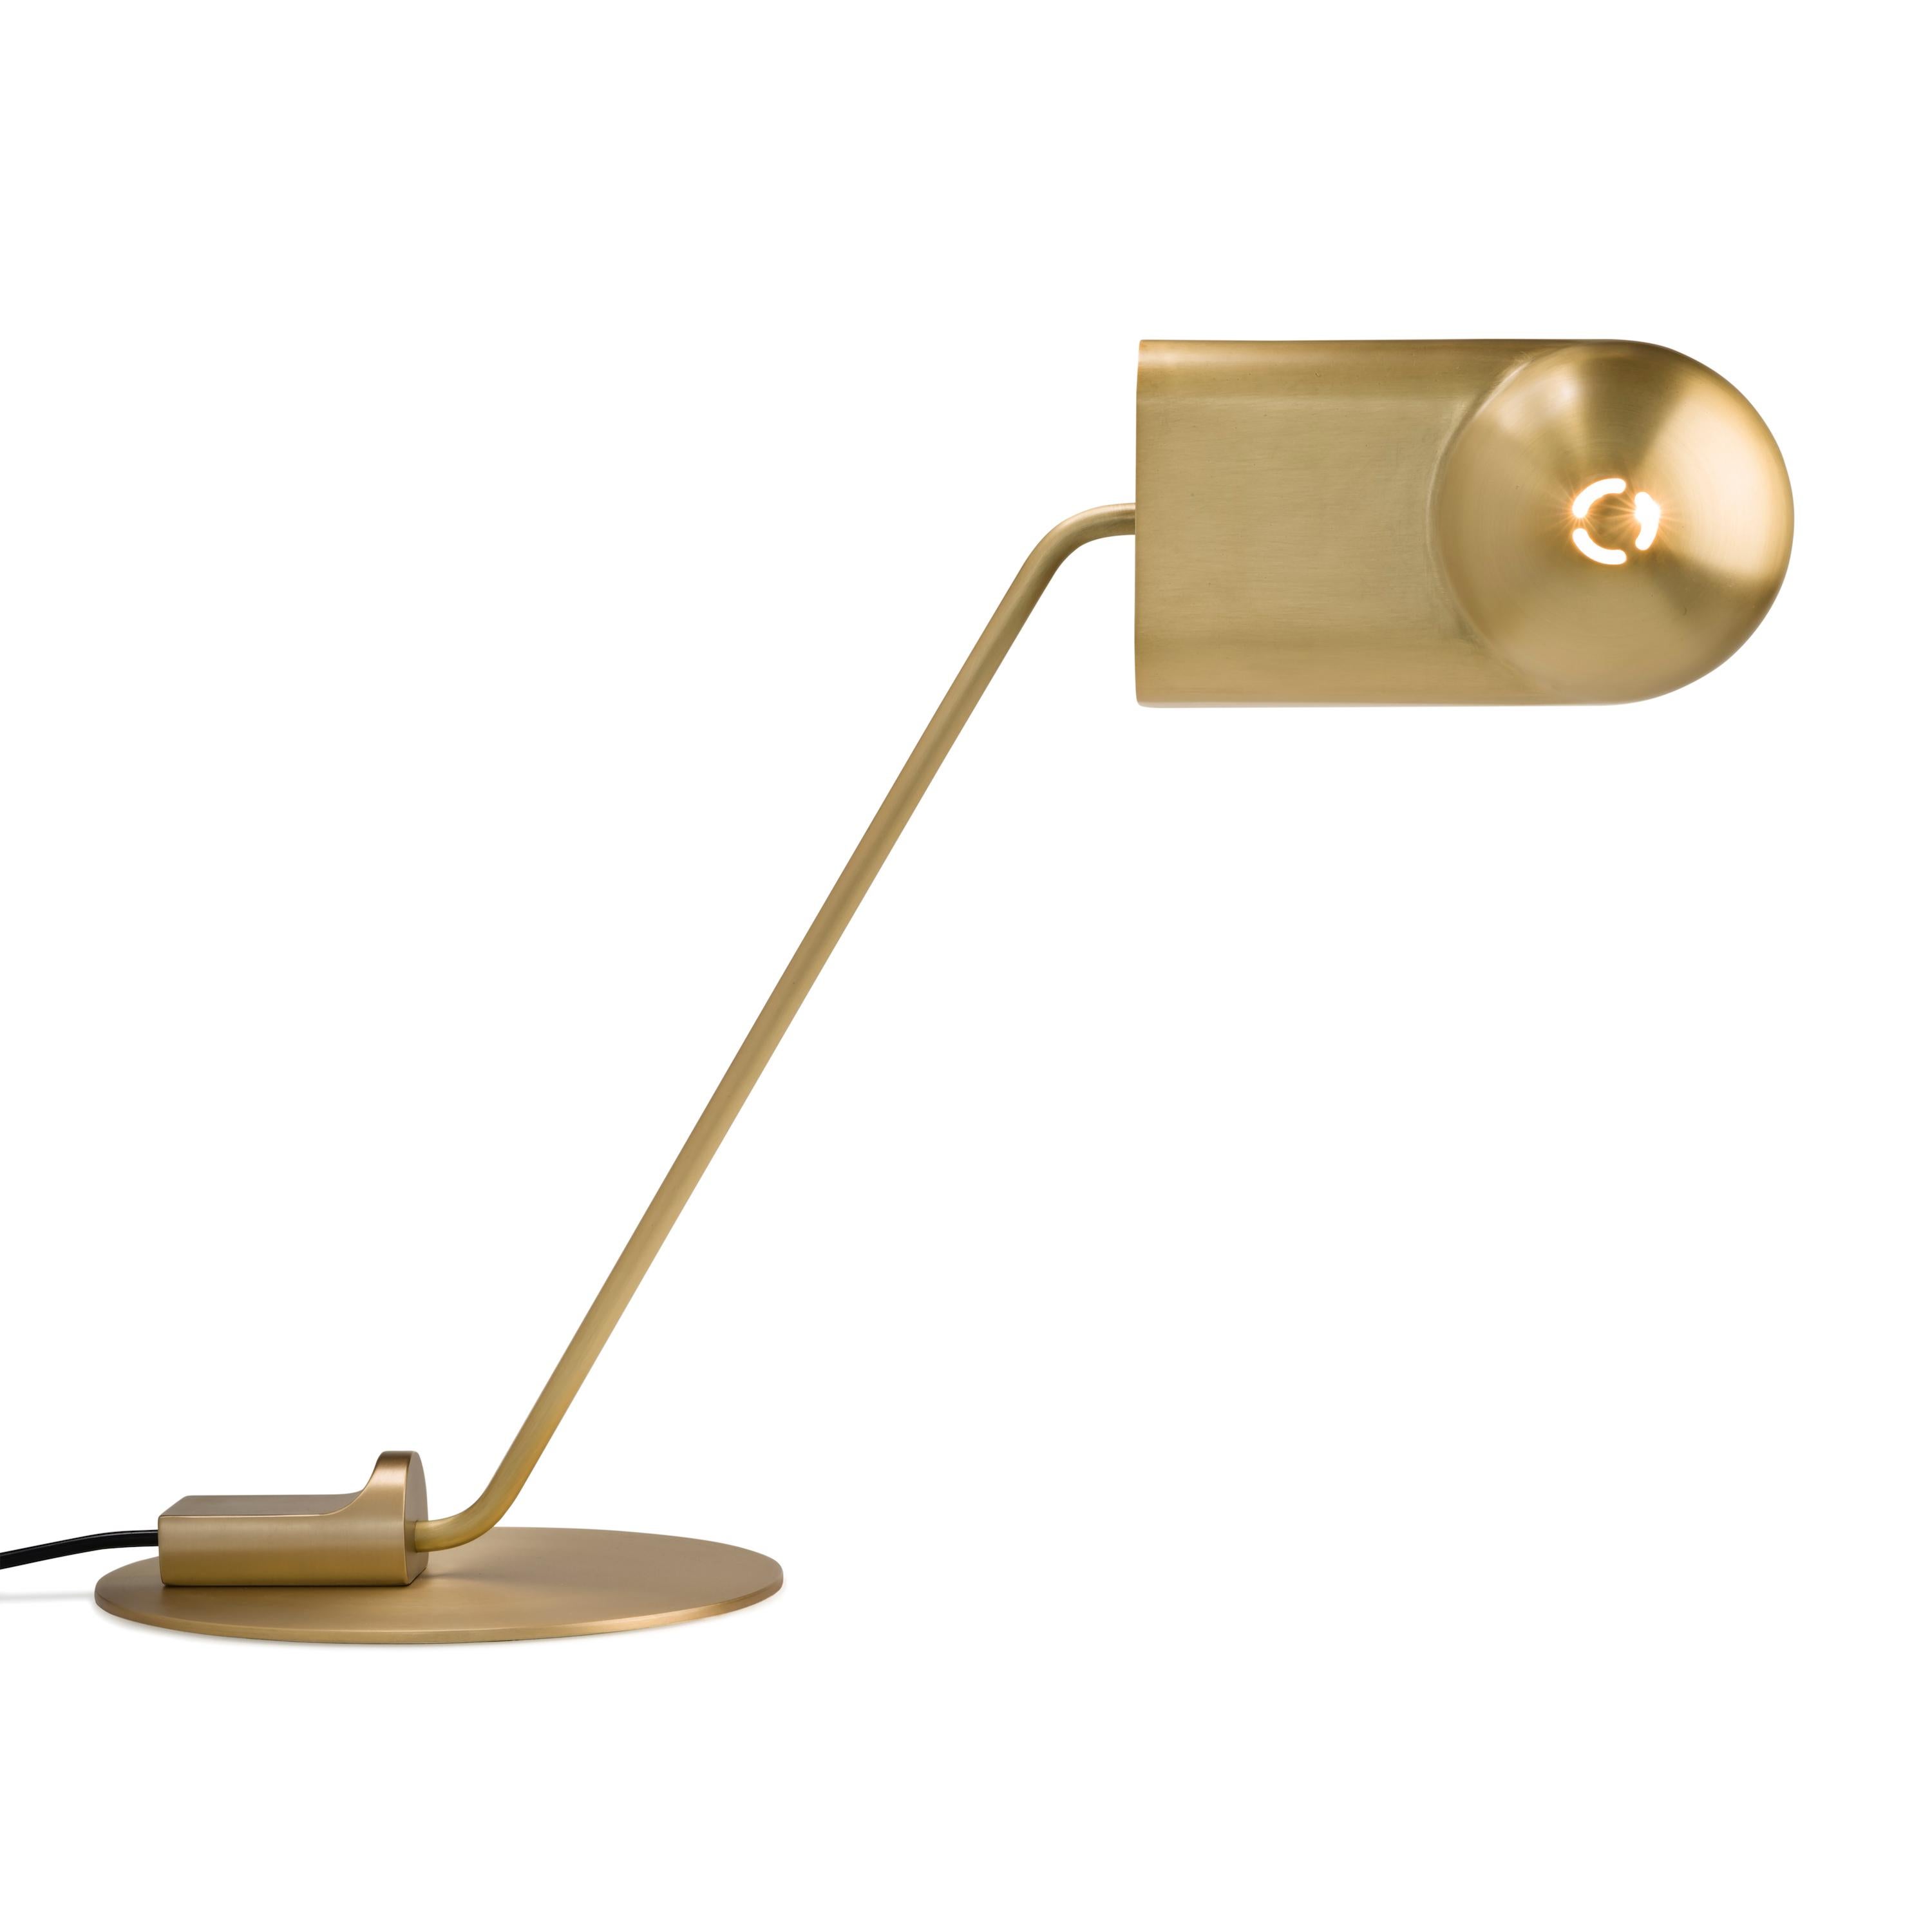 Domo table lamp by Joe Colombo. Current production manufactured by Karakter in Copenhagen, Denmark. Brass, also comes in a black painted aluminum, steel, adjustable shade. The Domo lamp was originally designed by Italian designer Joe Colombo in